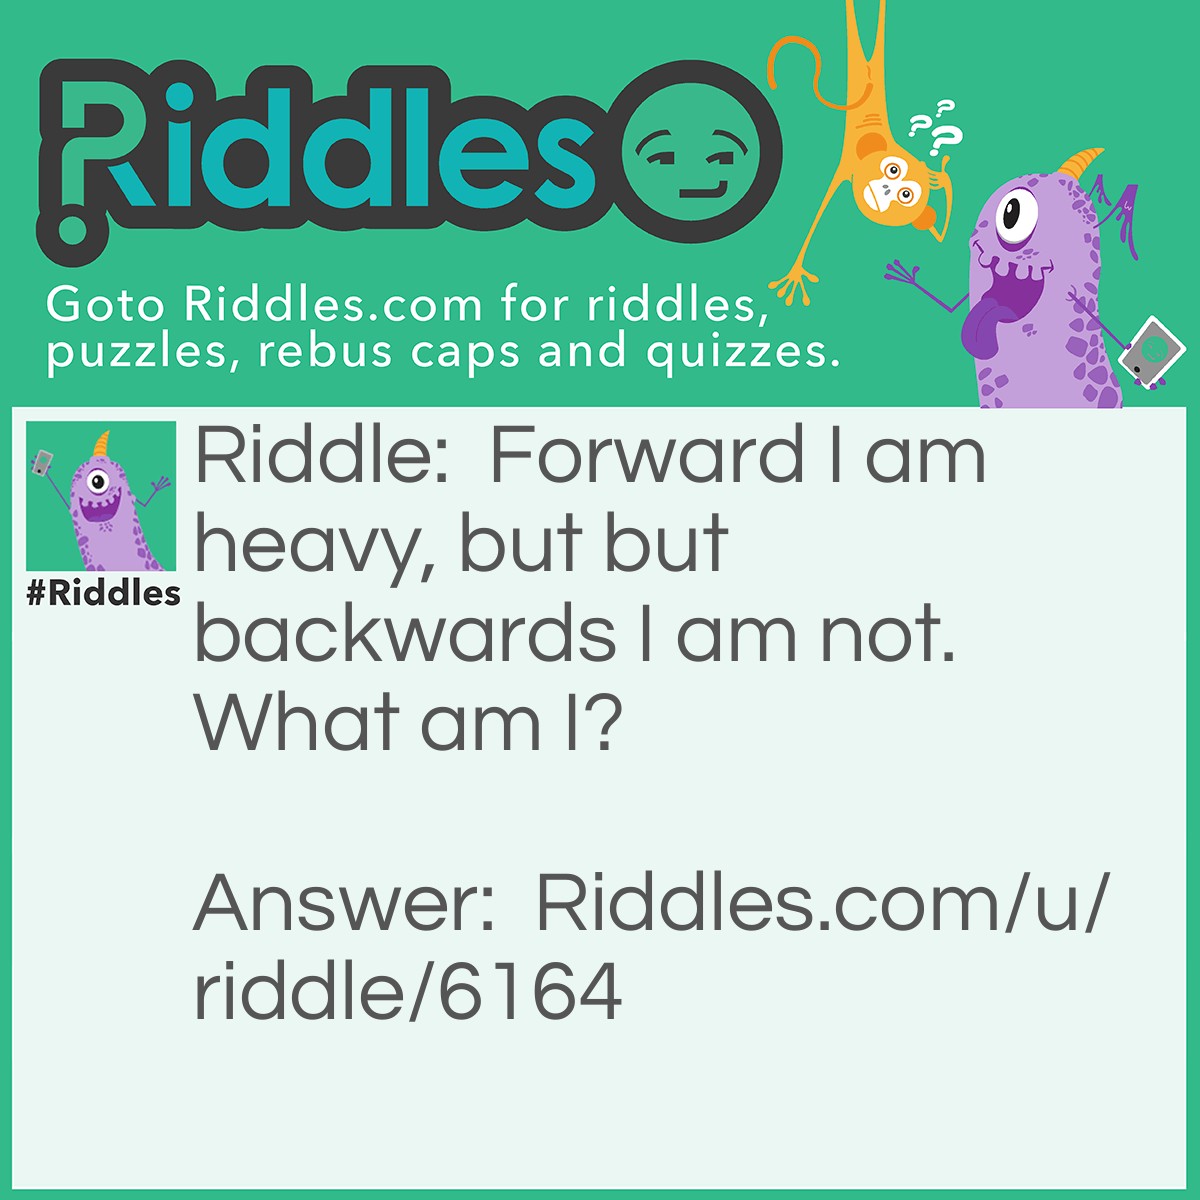 Riddle: Forward I am heavy, but but backwards I am not. What am I? Answer: Ton.